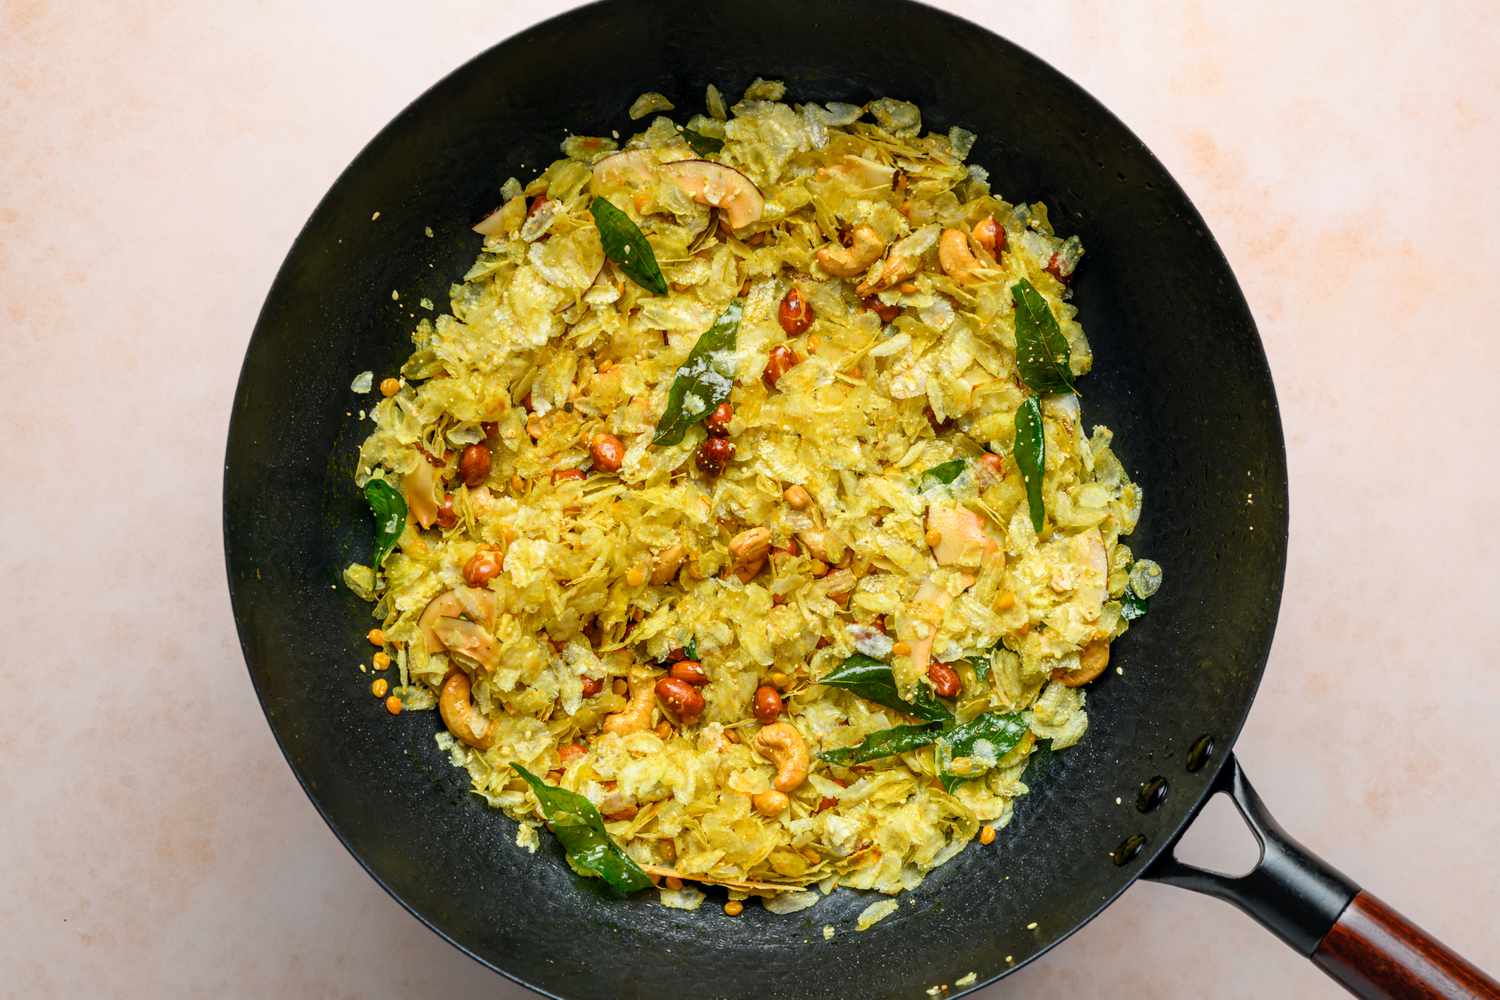 A large wok with a yellowed poha mixture, including the crispy nuts and seeds